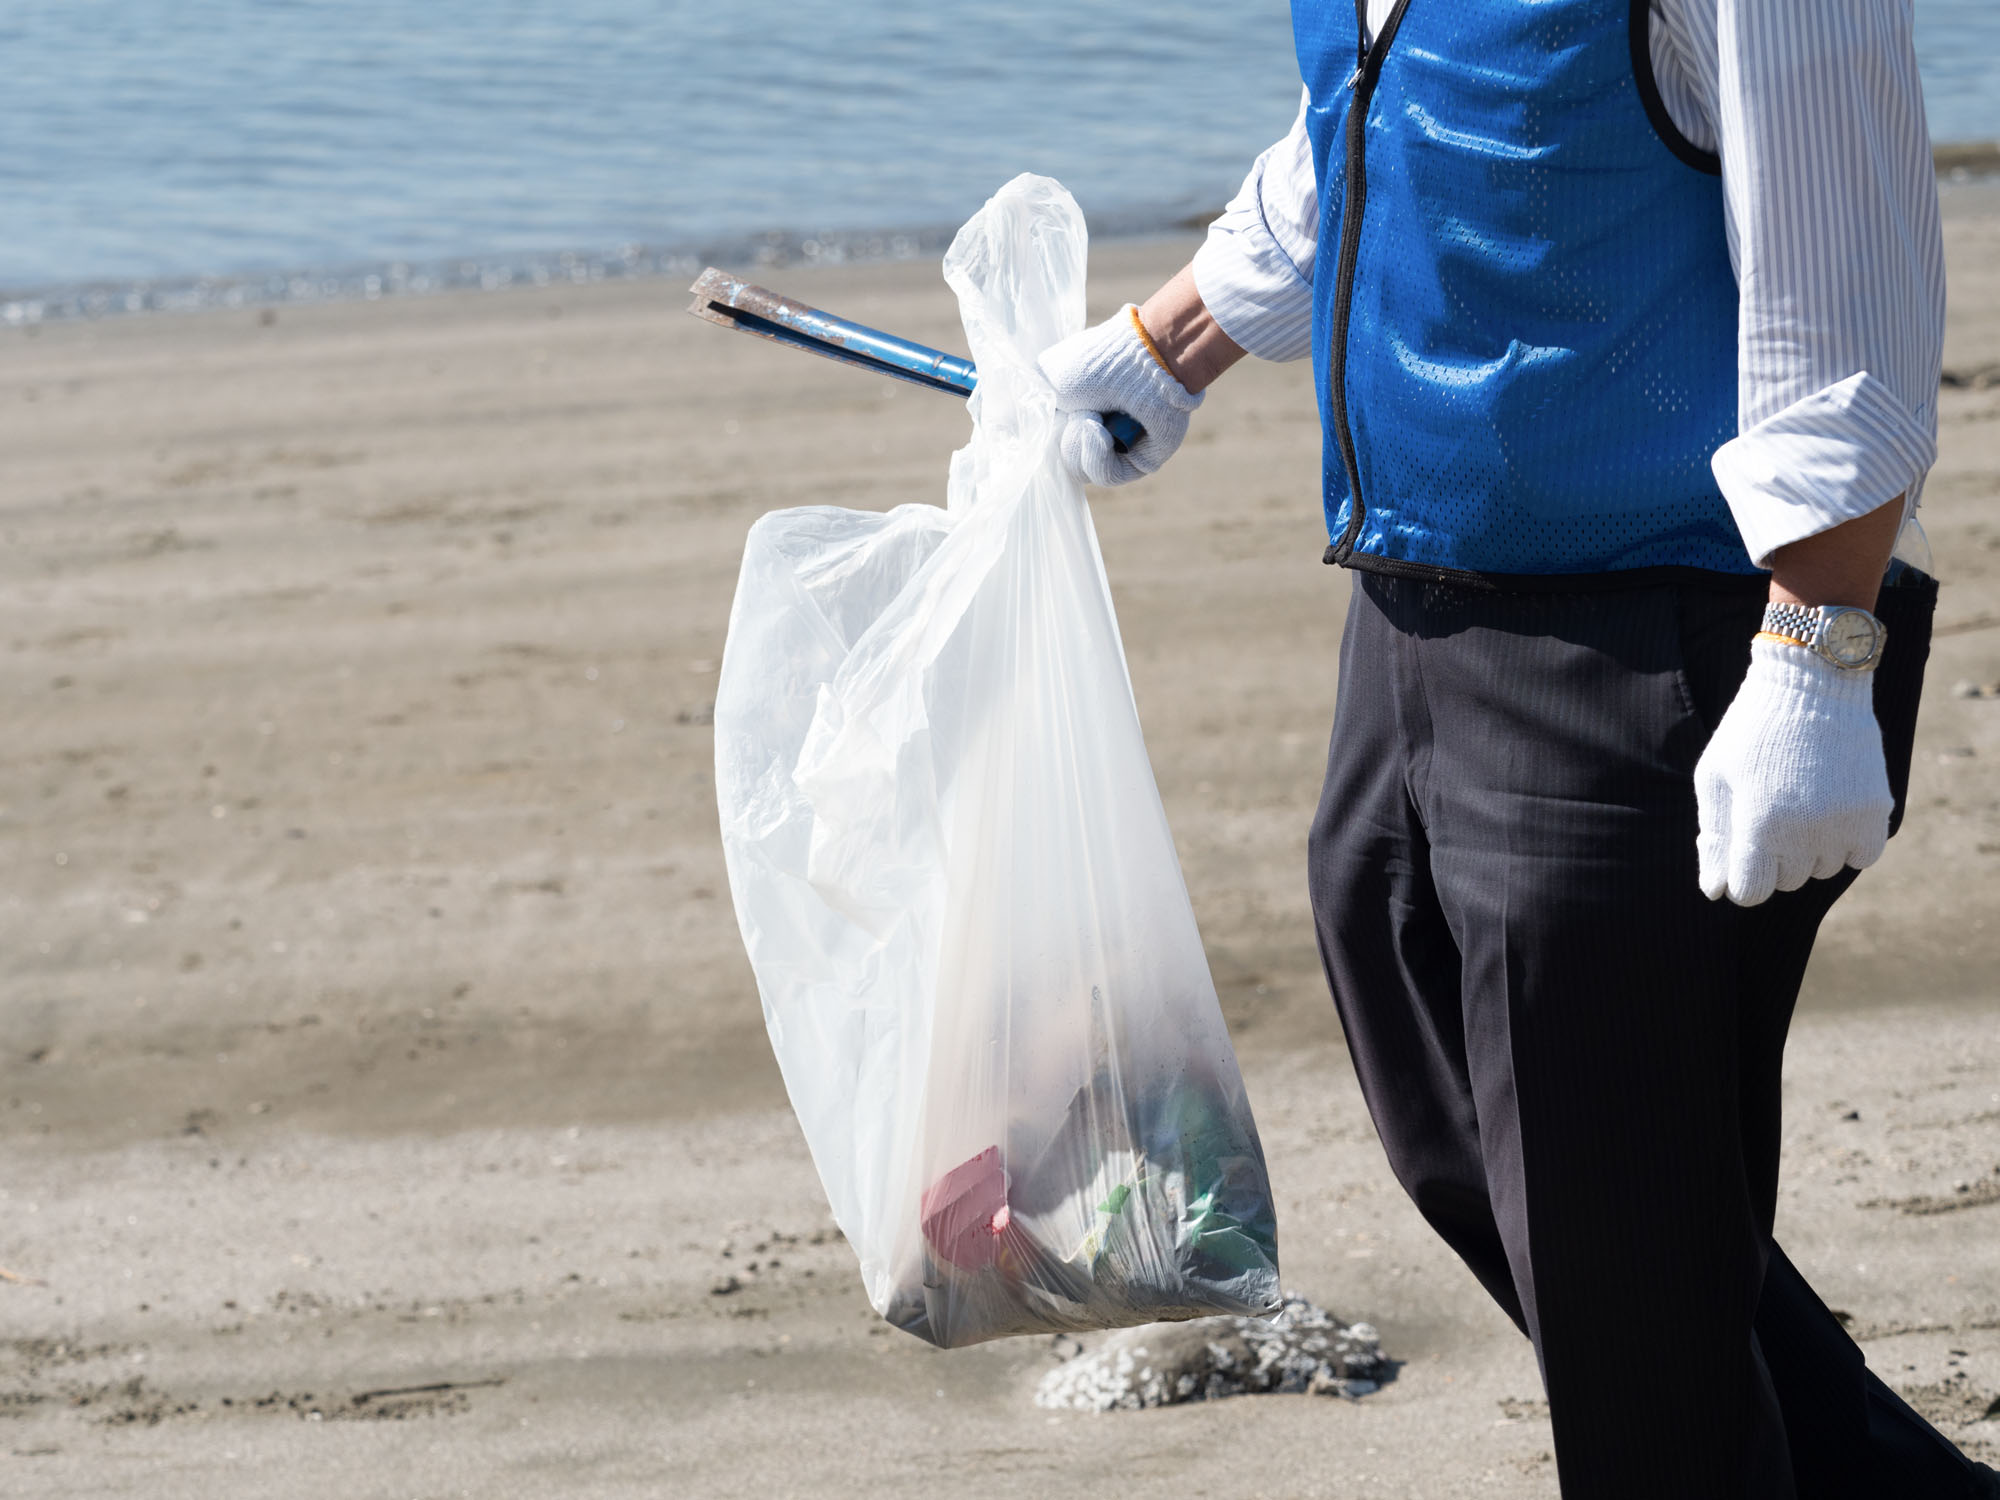 Talking trash: An organization that promotes litter collection as a sport has overseen 639 events nationwide comprising 76,000 participants. | GETTY IMAGES